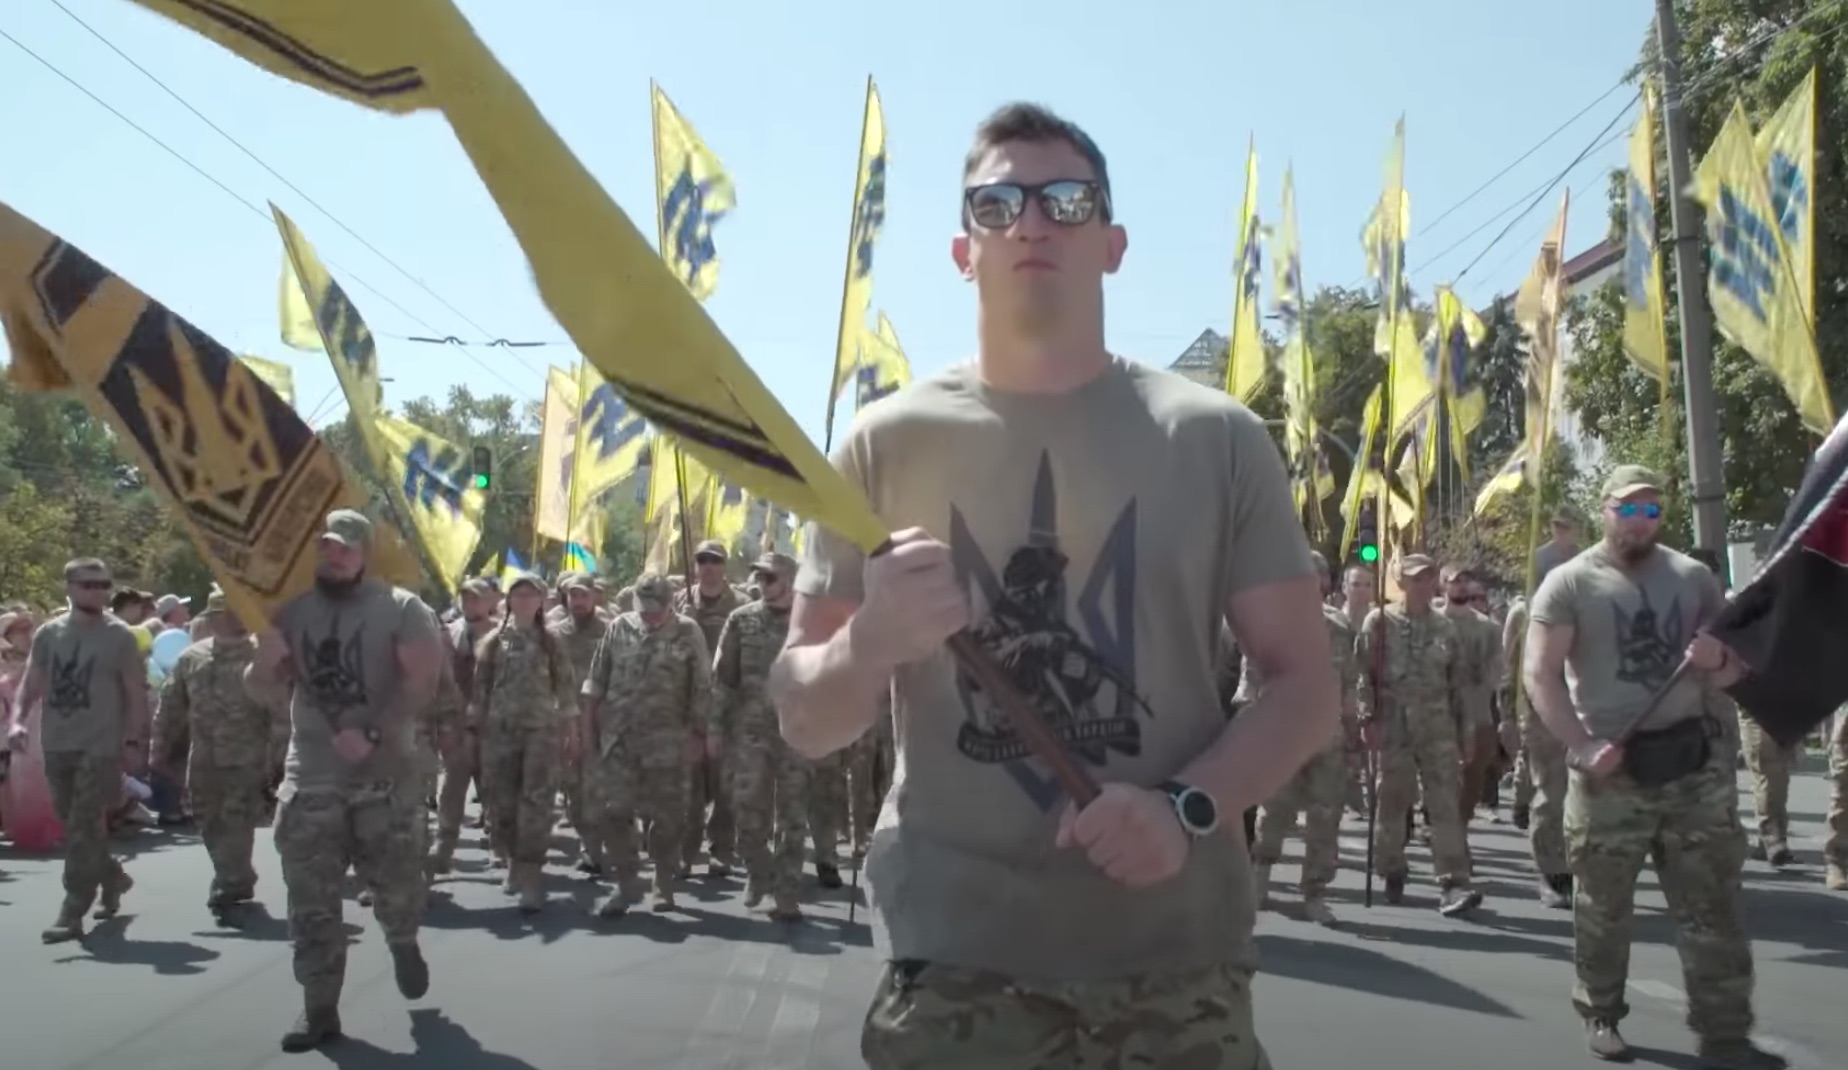 The West’s Support For Ukraine Is A Demonstration Of How So Many People Supported Hitler